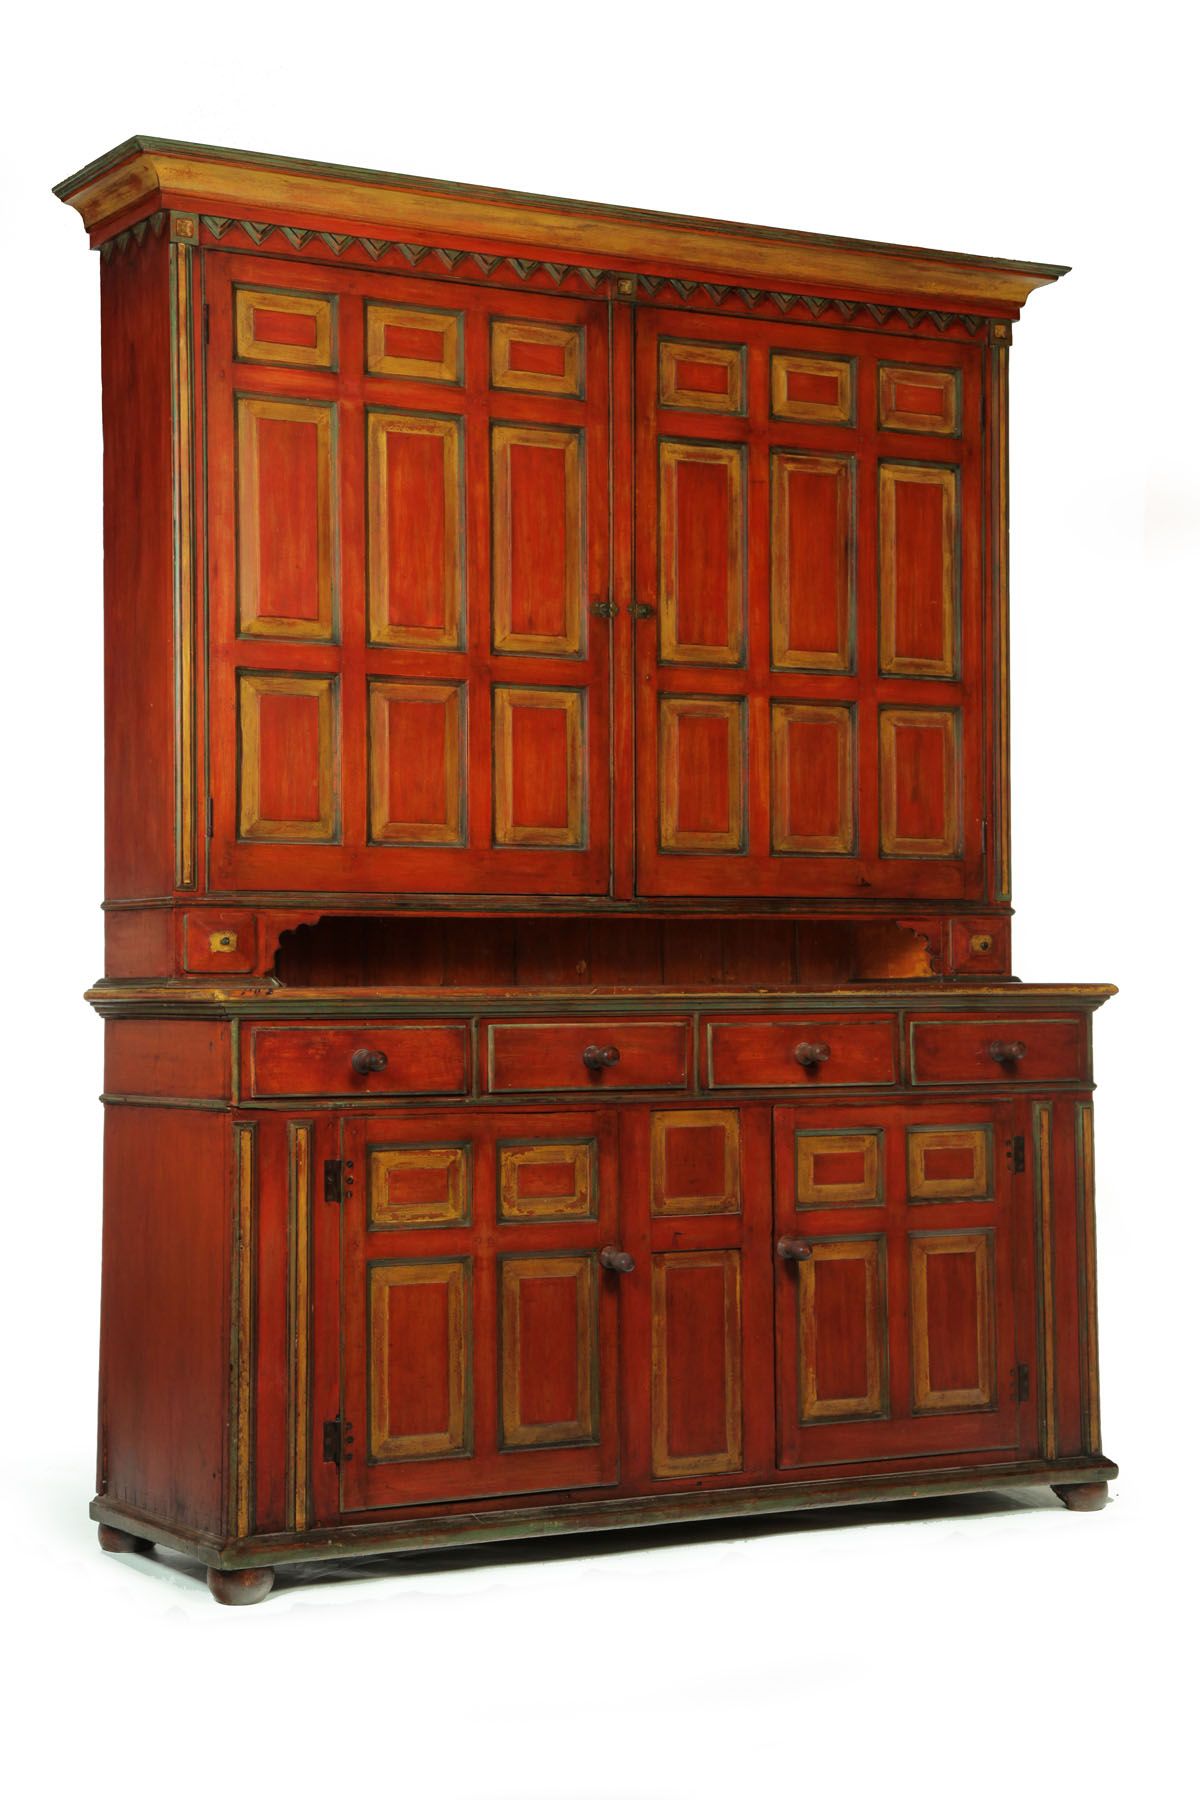 DECORATED STEP-BACK CUPBOARD. Probably American, early 19th century ...